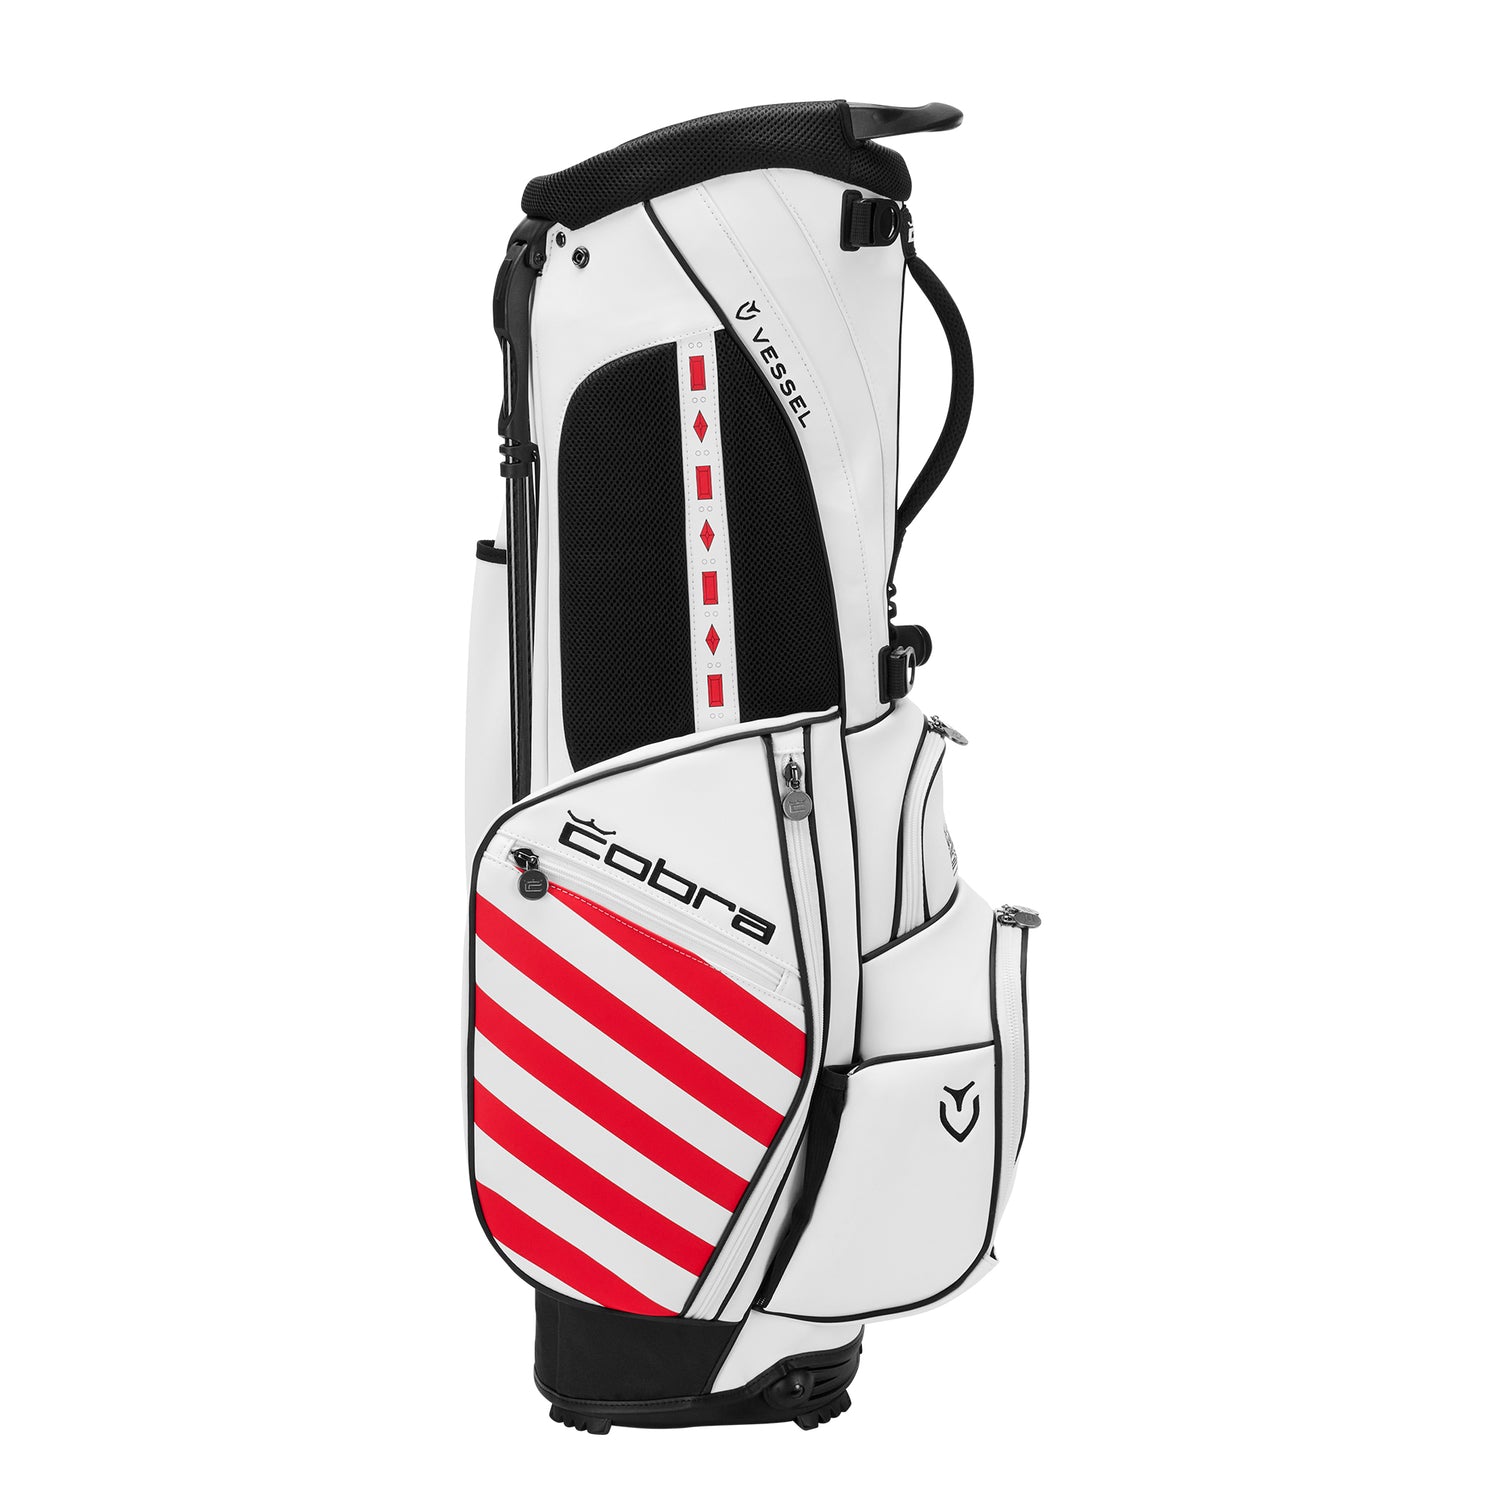 Vessel Carbon Fiber Collection: Limited-Edition Golf Bags